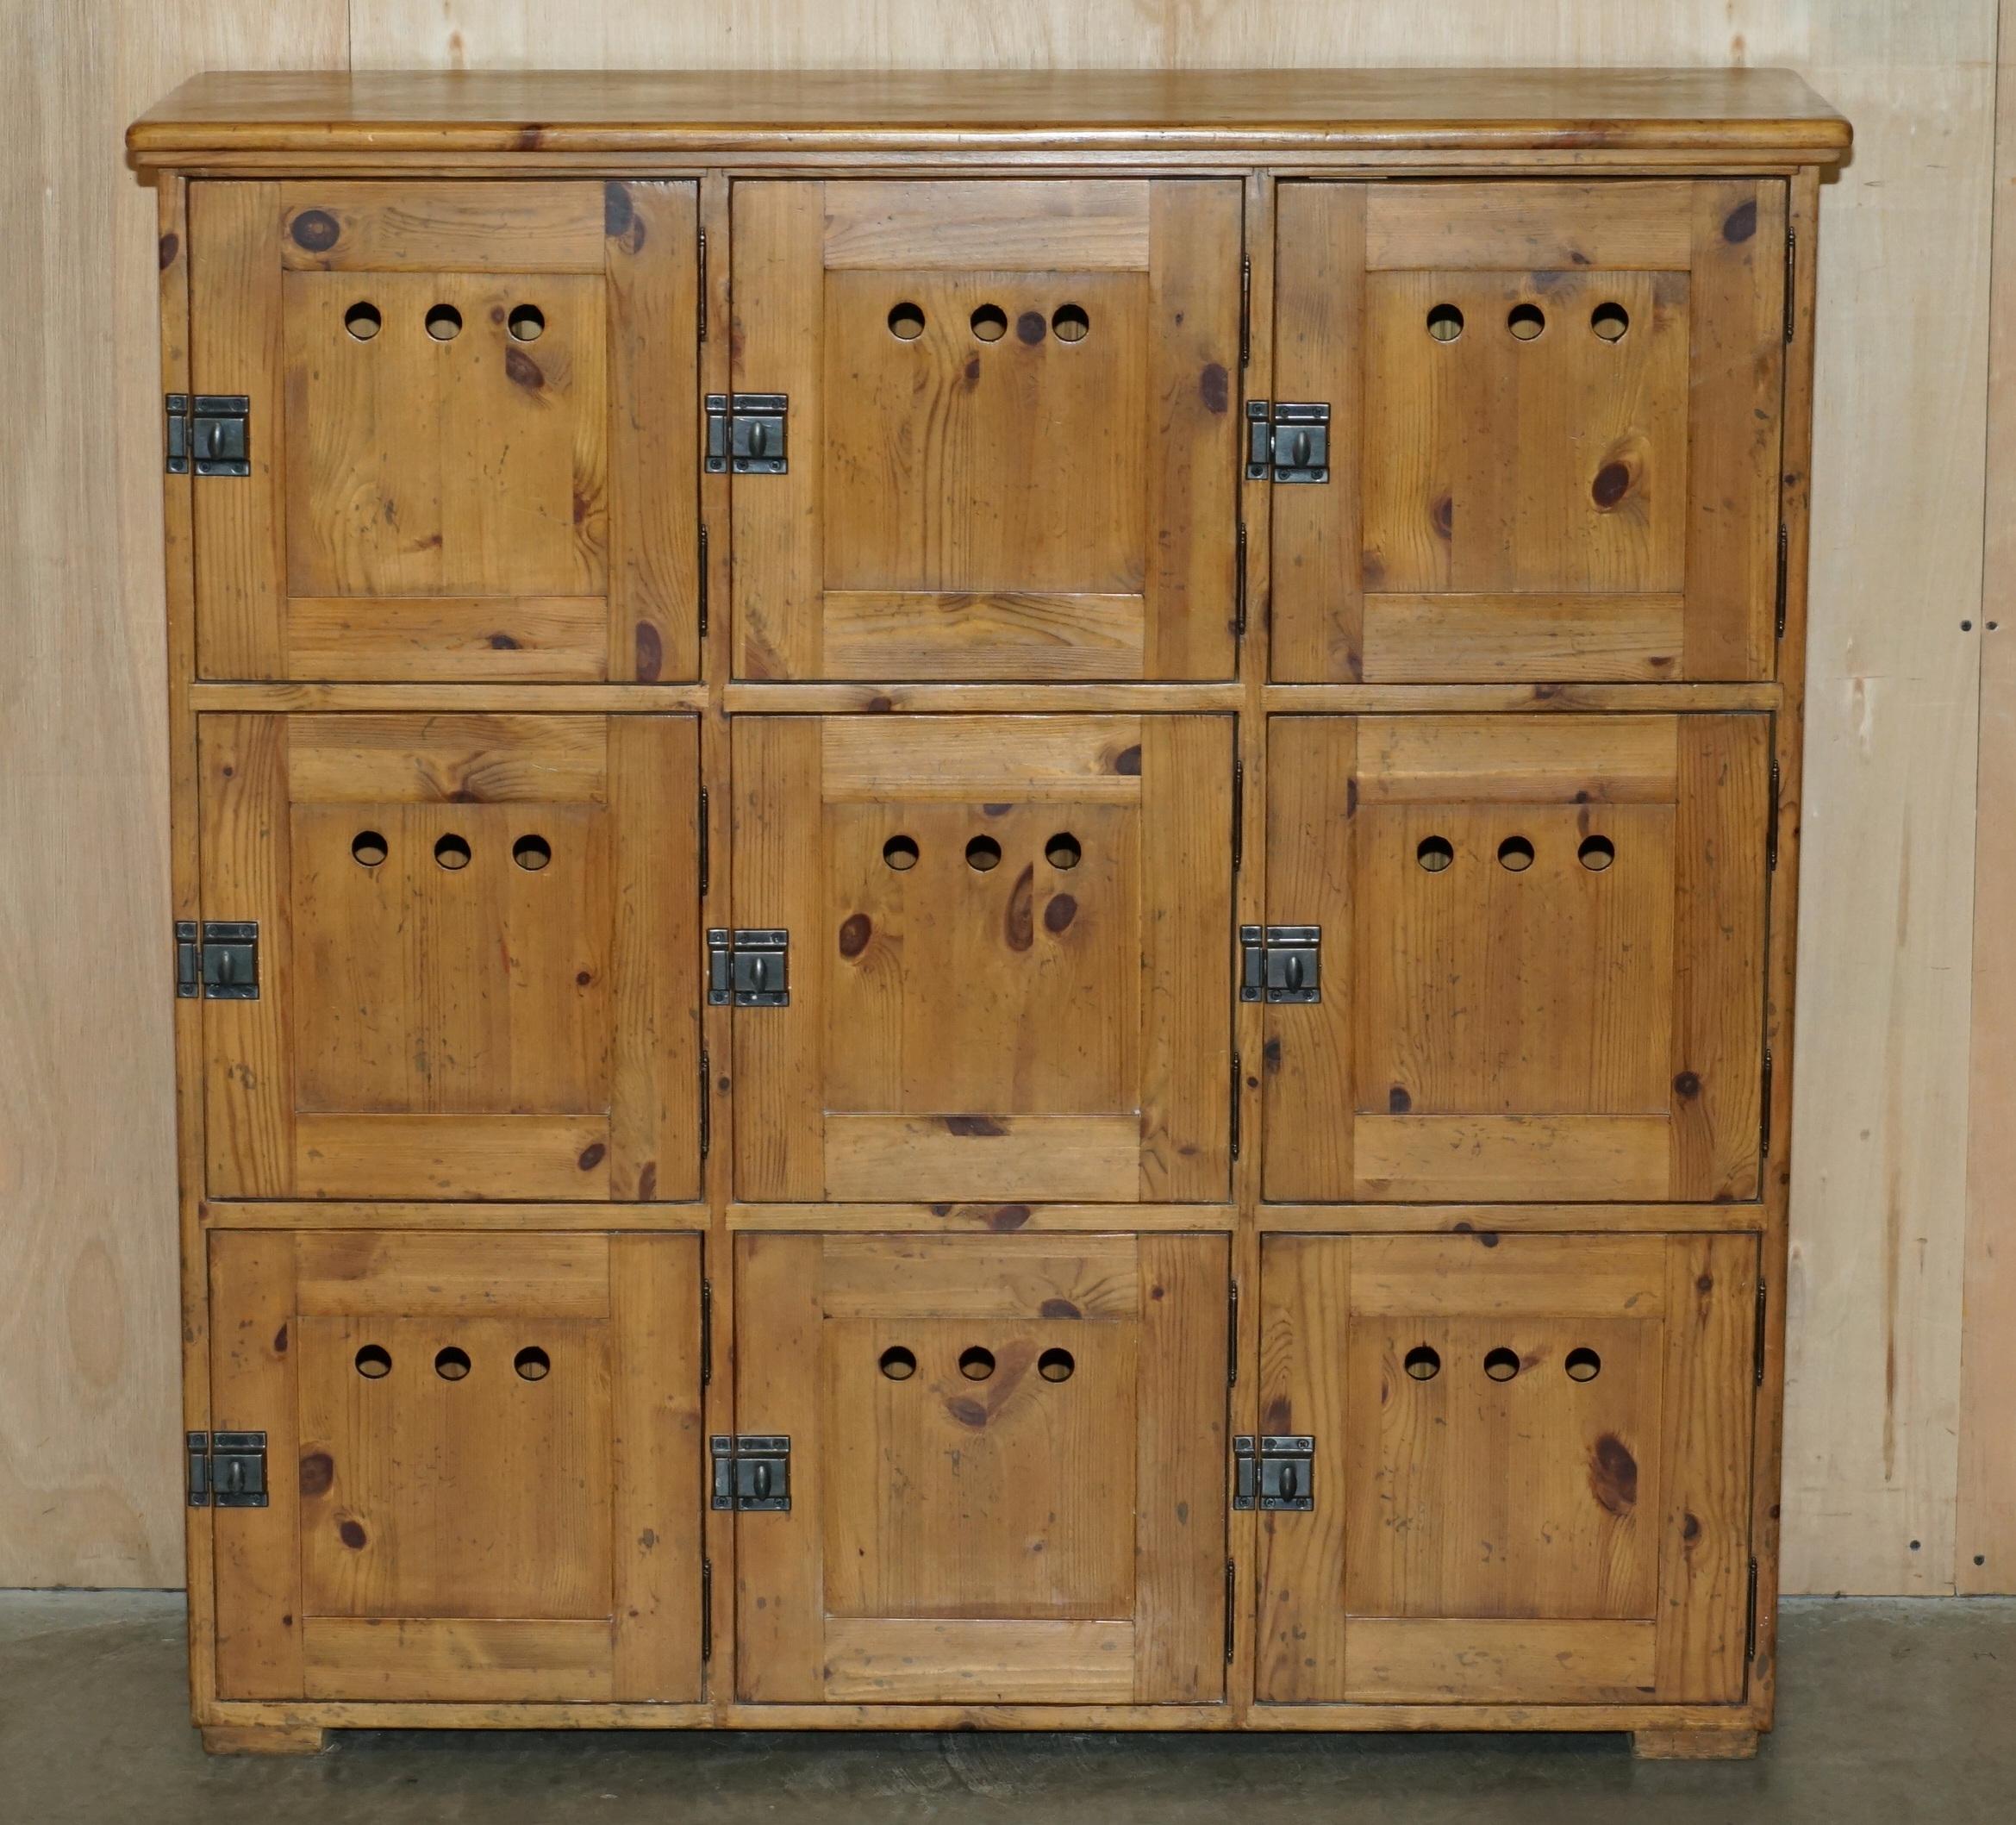 Royal House Antiques

Royal House Antiques is delighted to offer for sale this lovely antique circa 1930’s English oak locker ideally suited for storing shoes

Please note the delivery fee listed is just a guide, it covers within the M25 only for